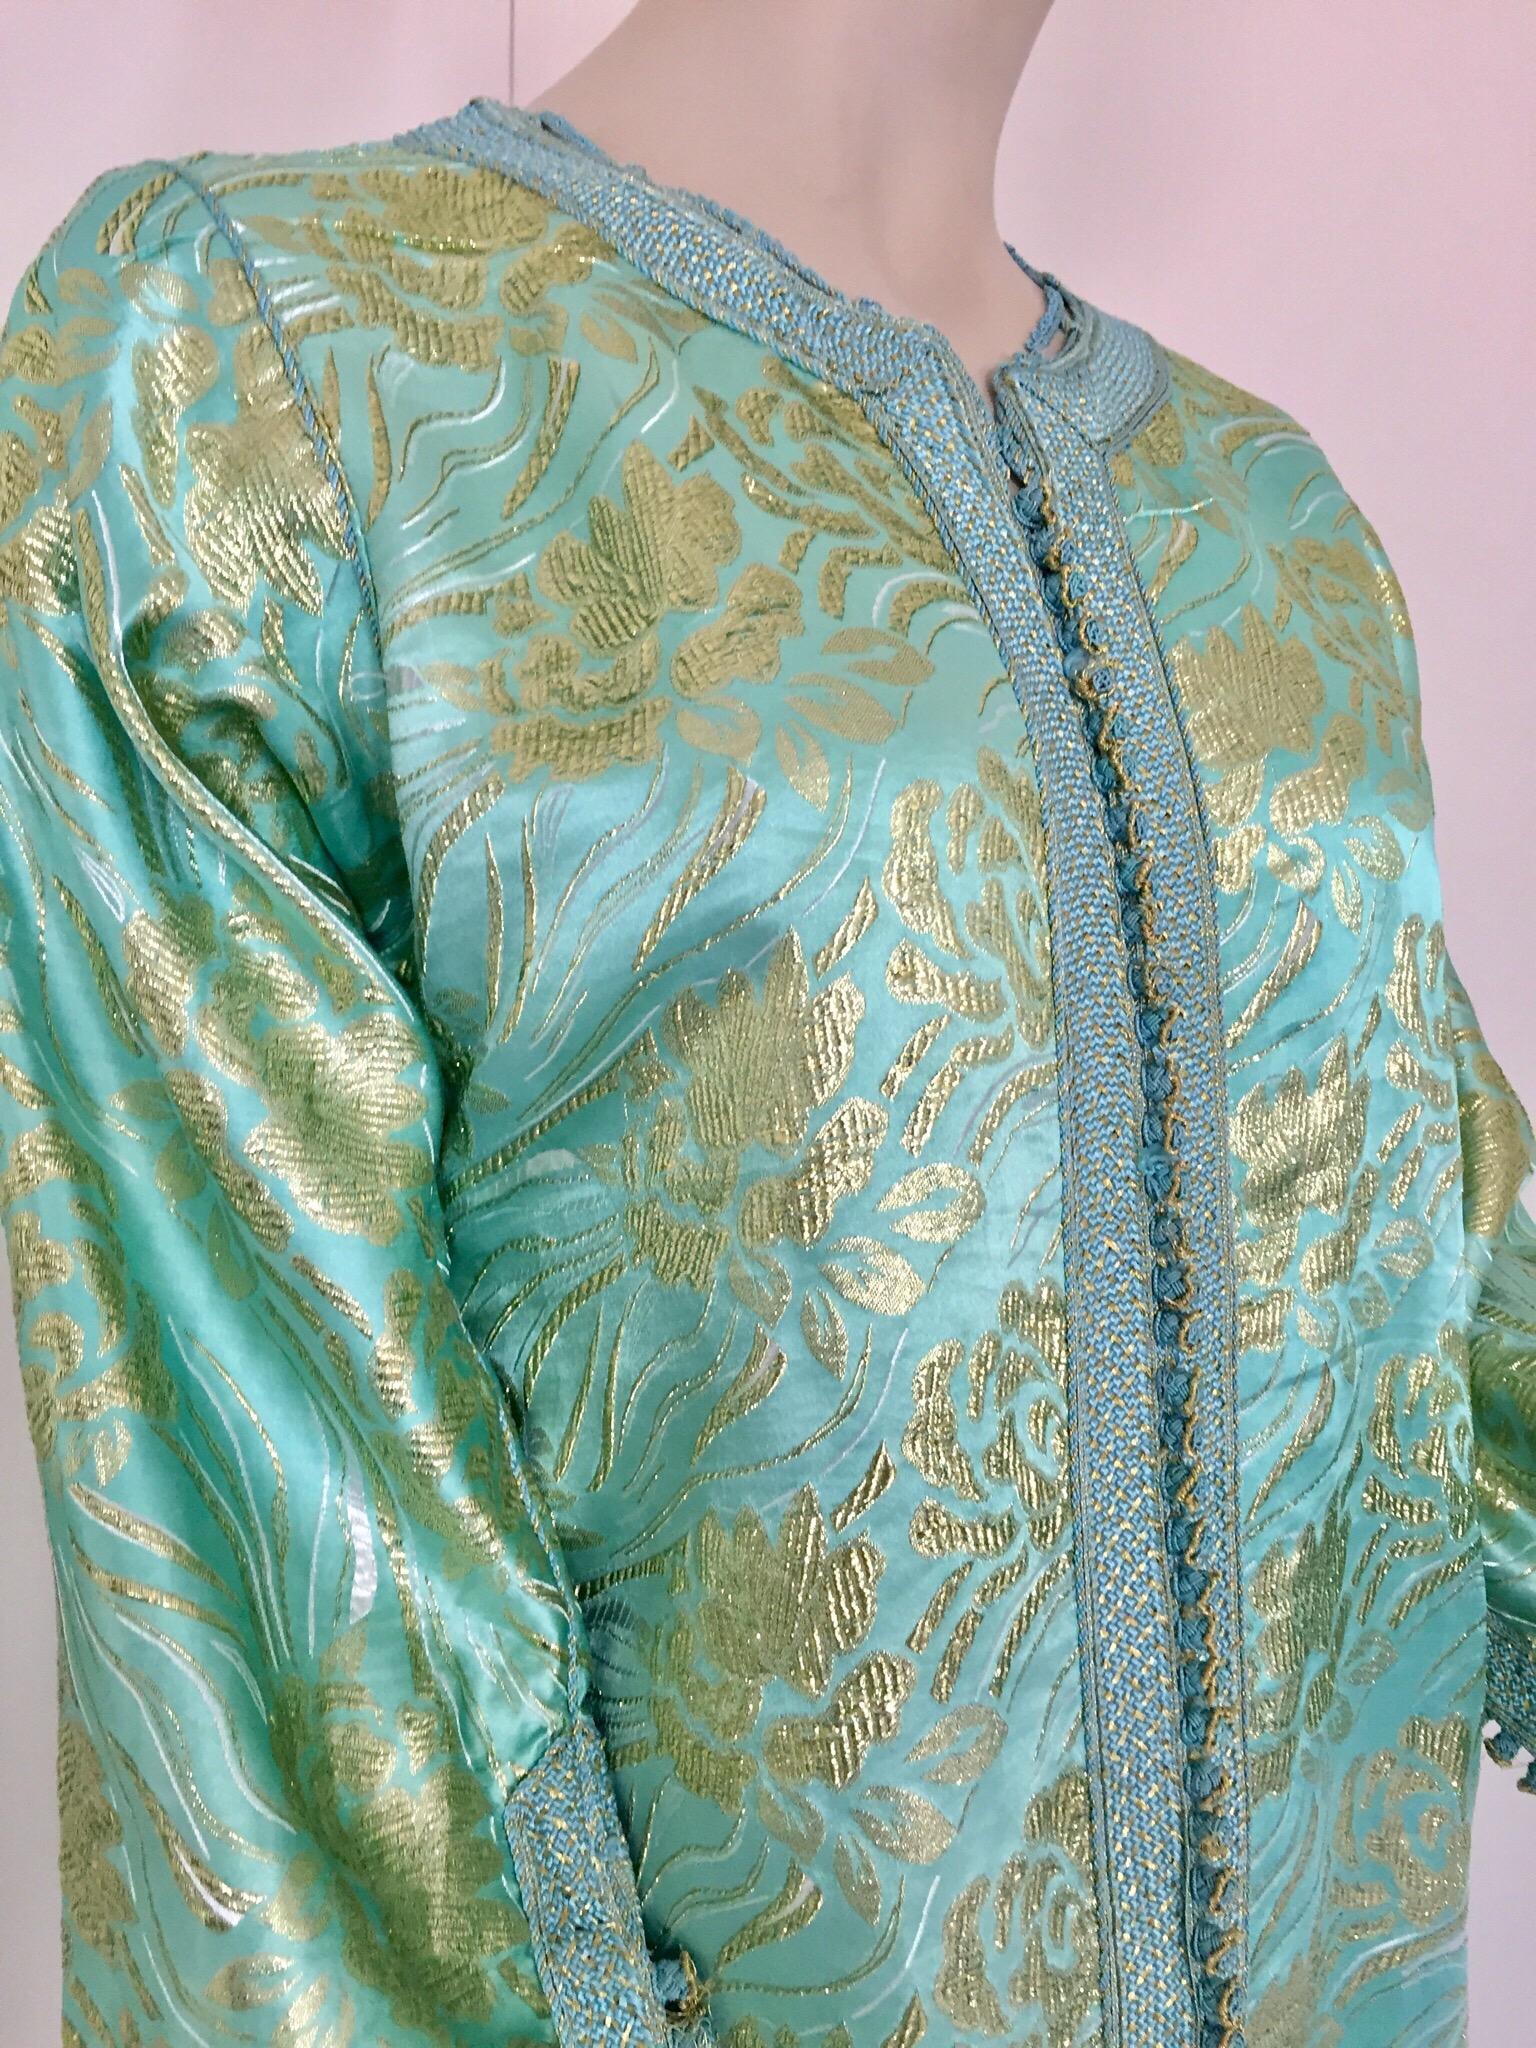 Moroccan Vintage Kaftan in Turquoise and Gold Floral Brocade Metallic Lame - 1 For Sale 1